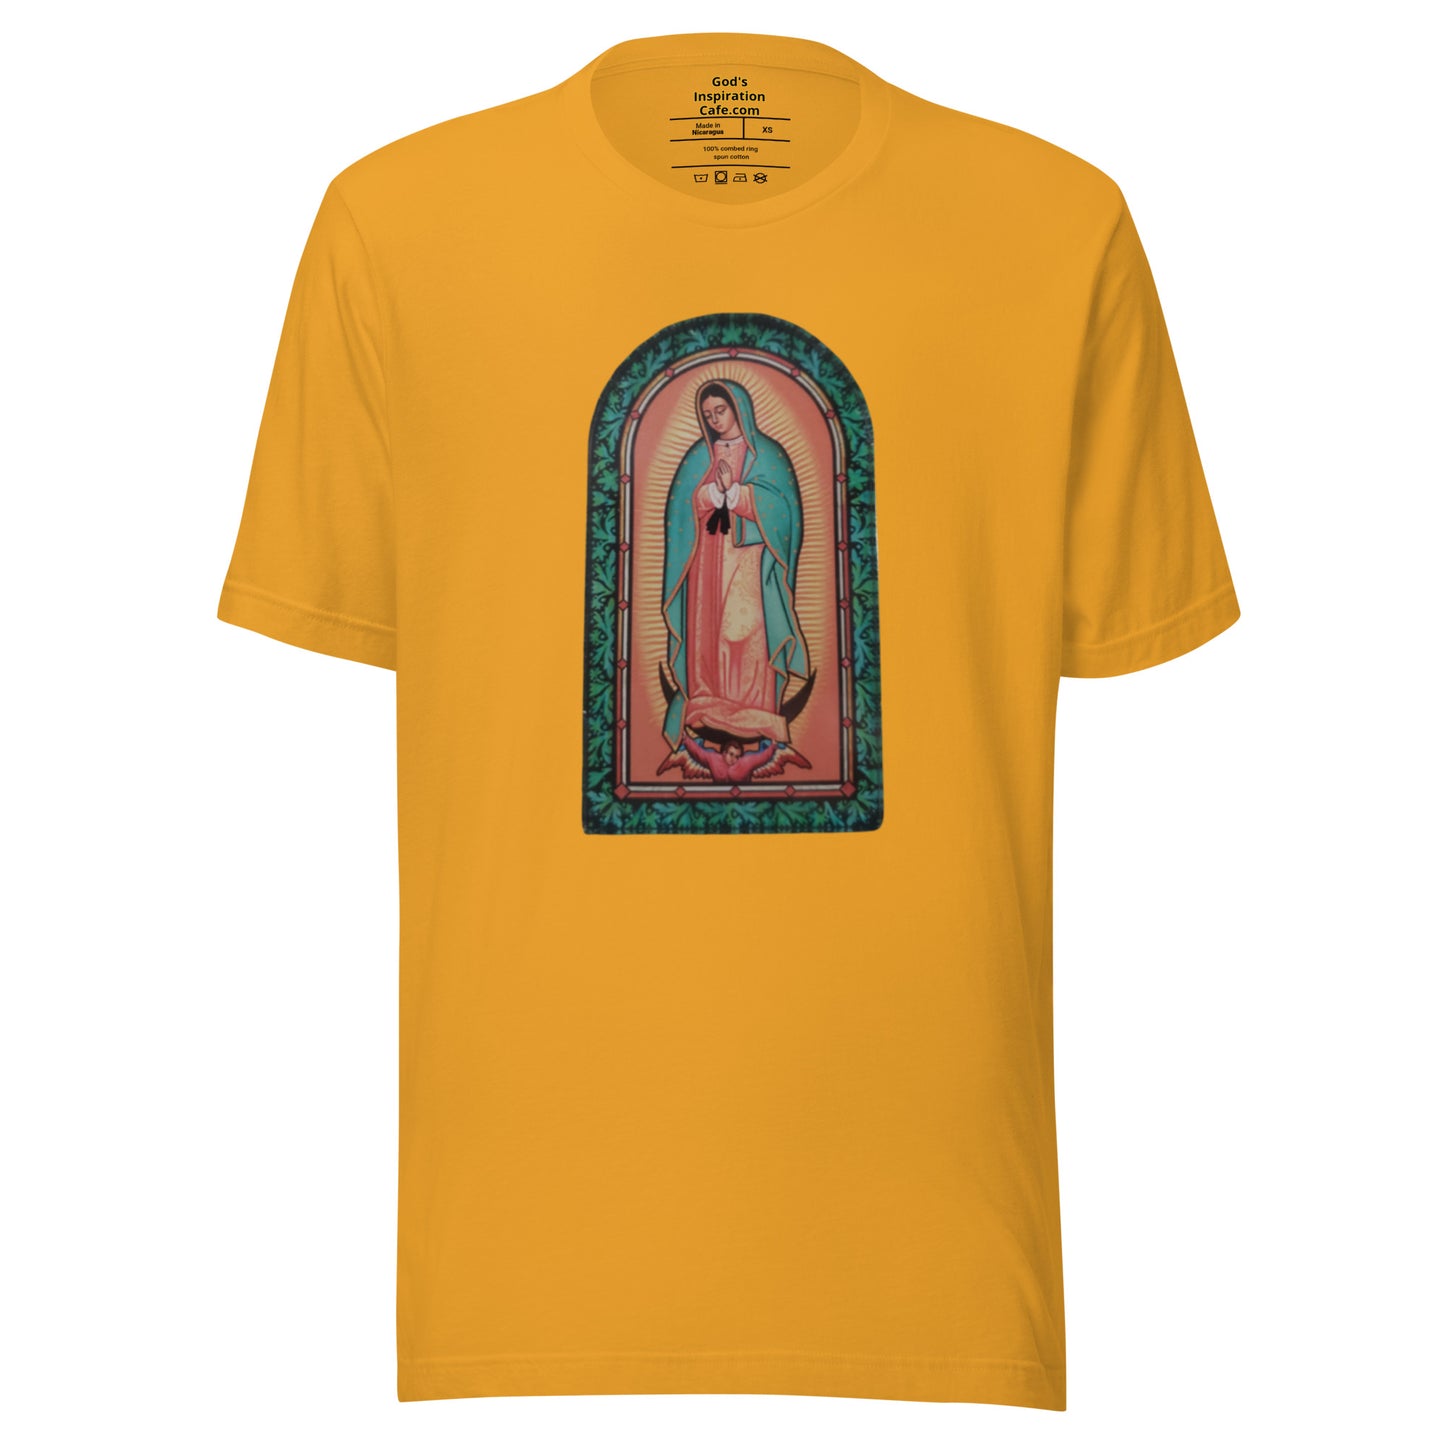 Our Lady of Guadalupe Shirt